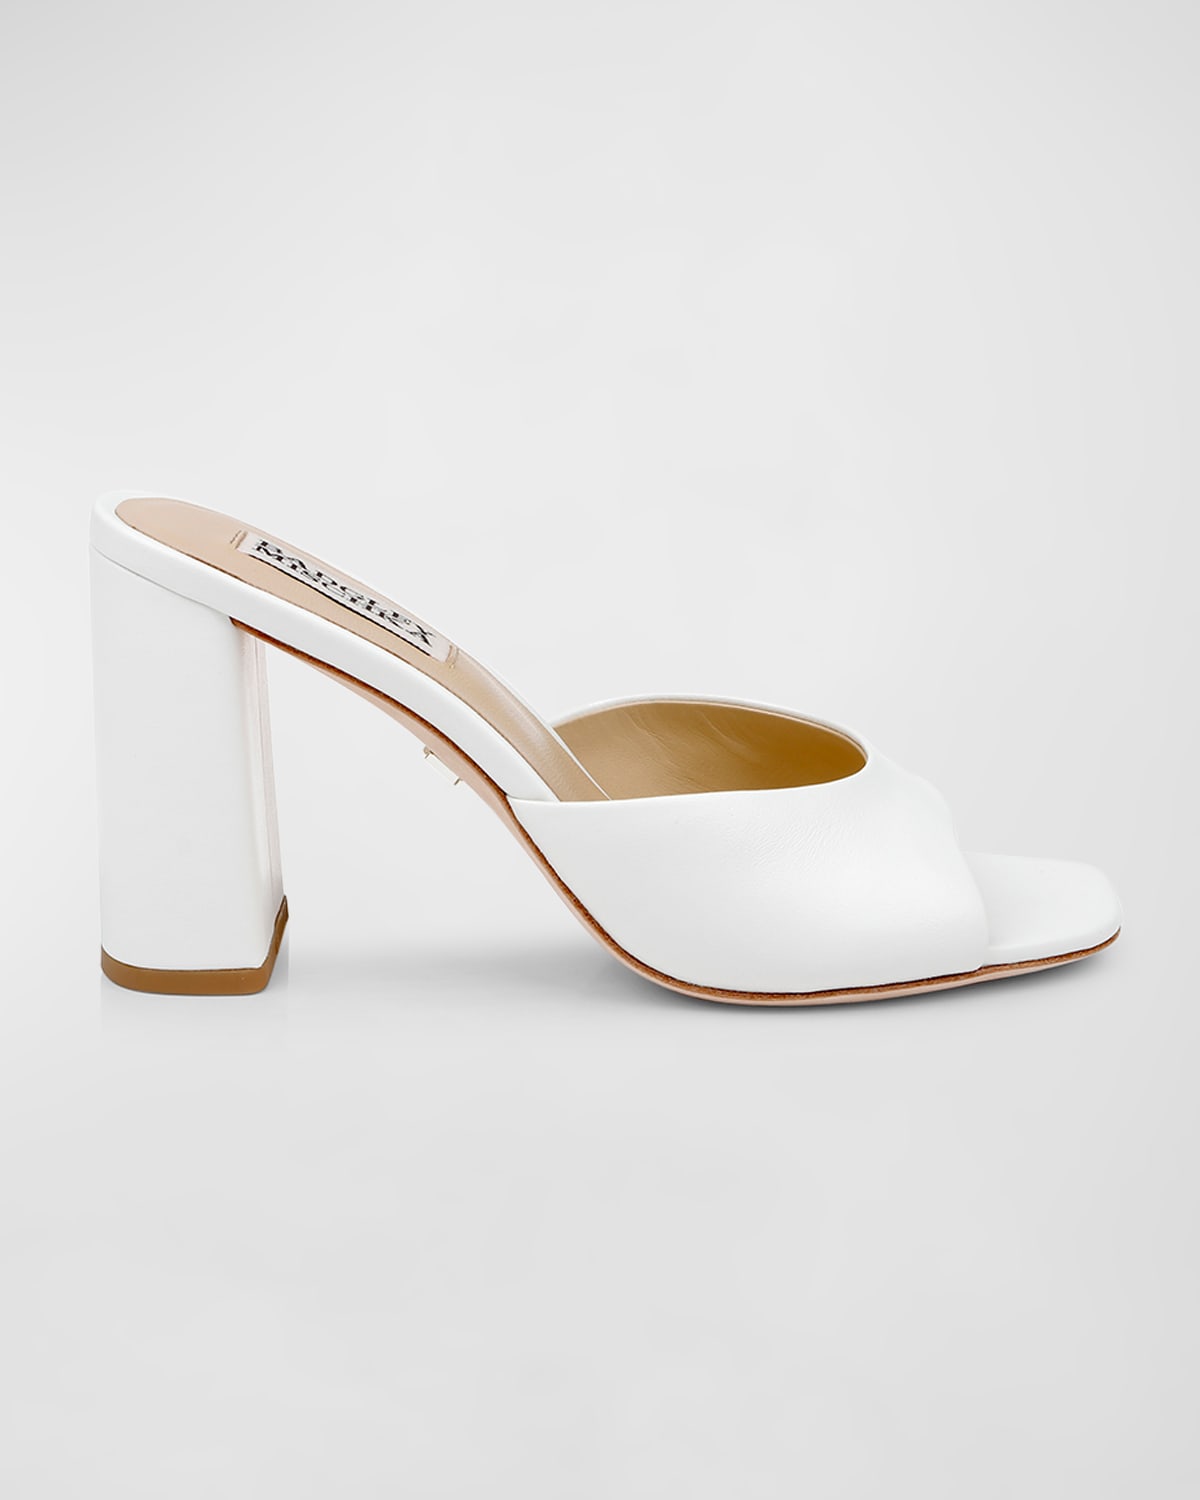 Shop Badgley Mischka Cadence Leather Mule Sandals In Soft White